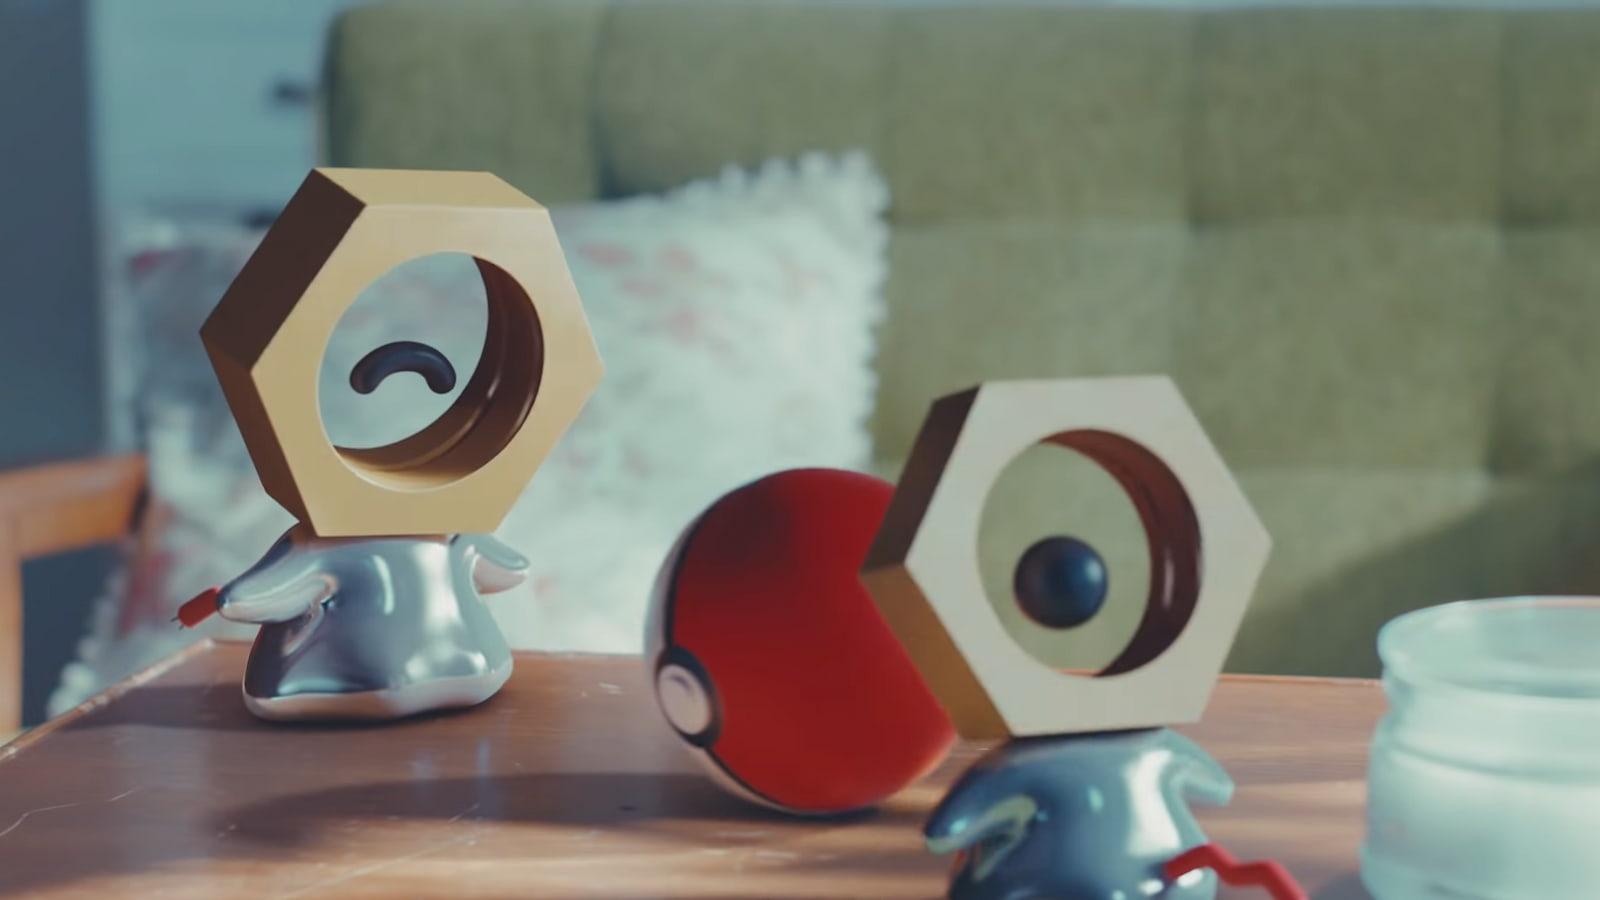 Meltan playing in UK Pokemon animated discovery video